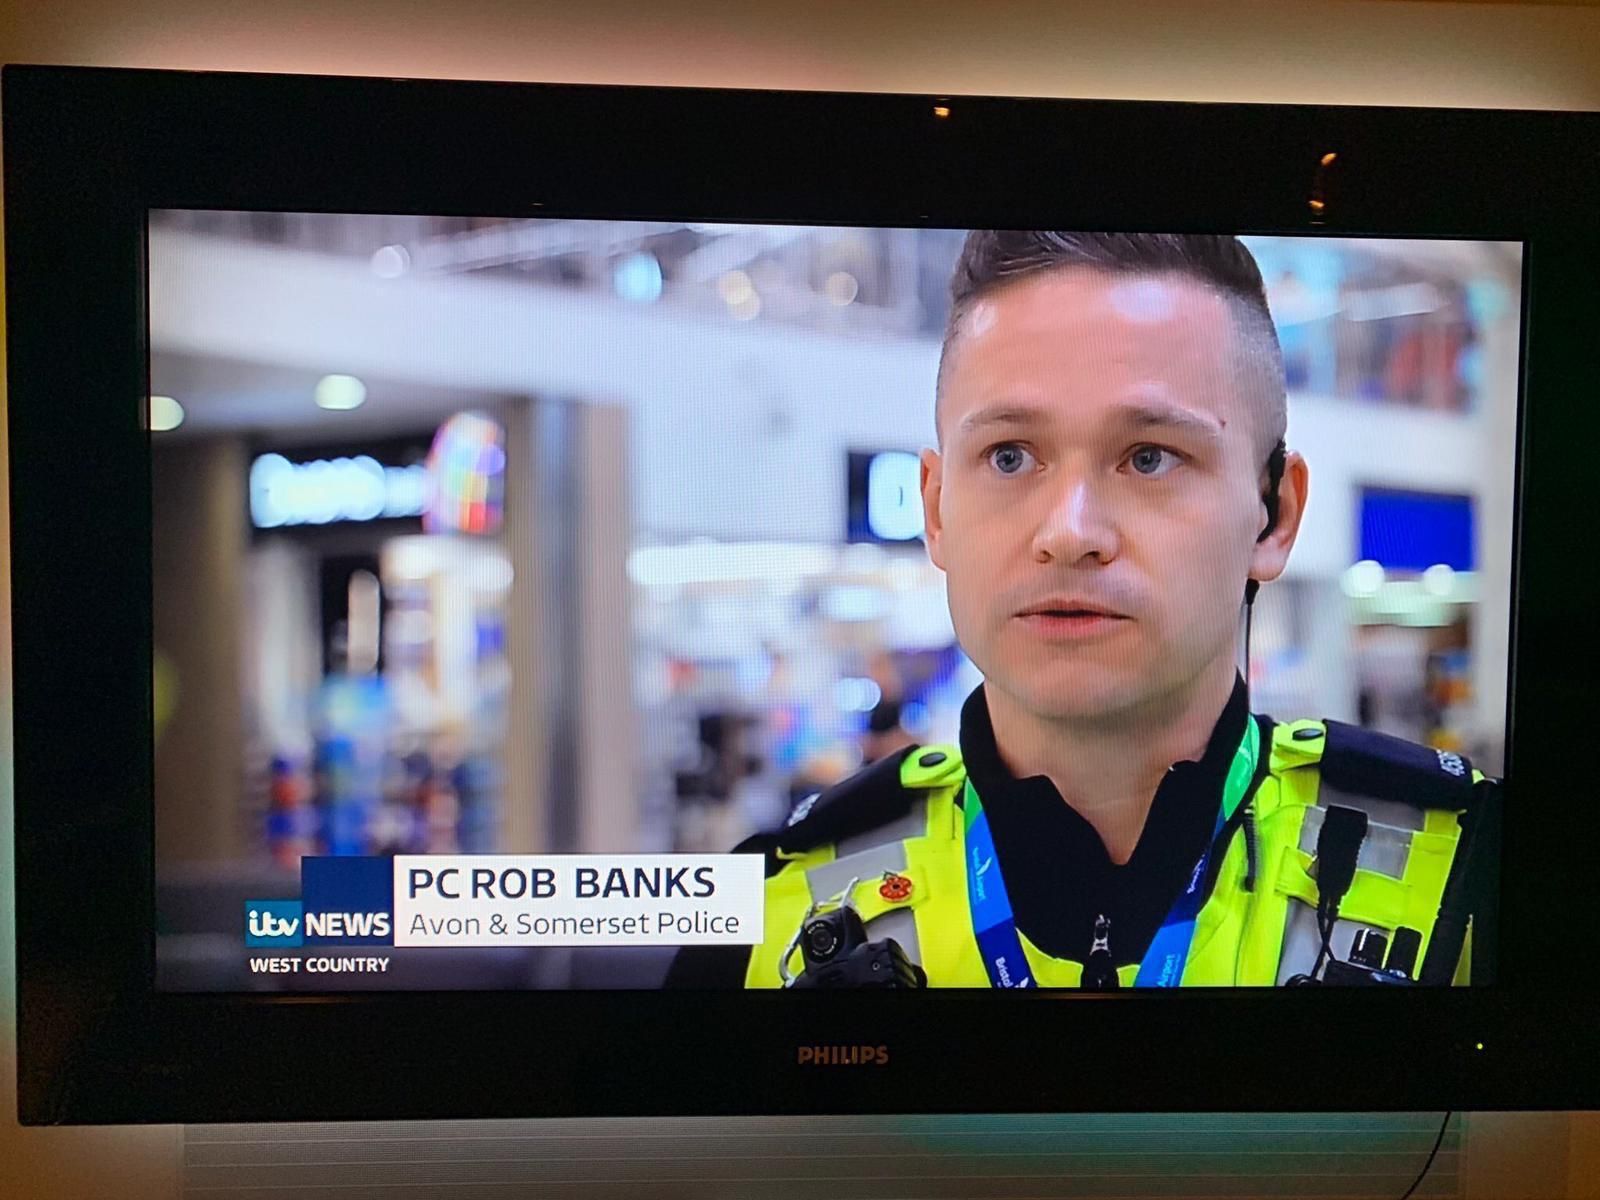 This police officer’s name